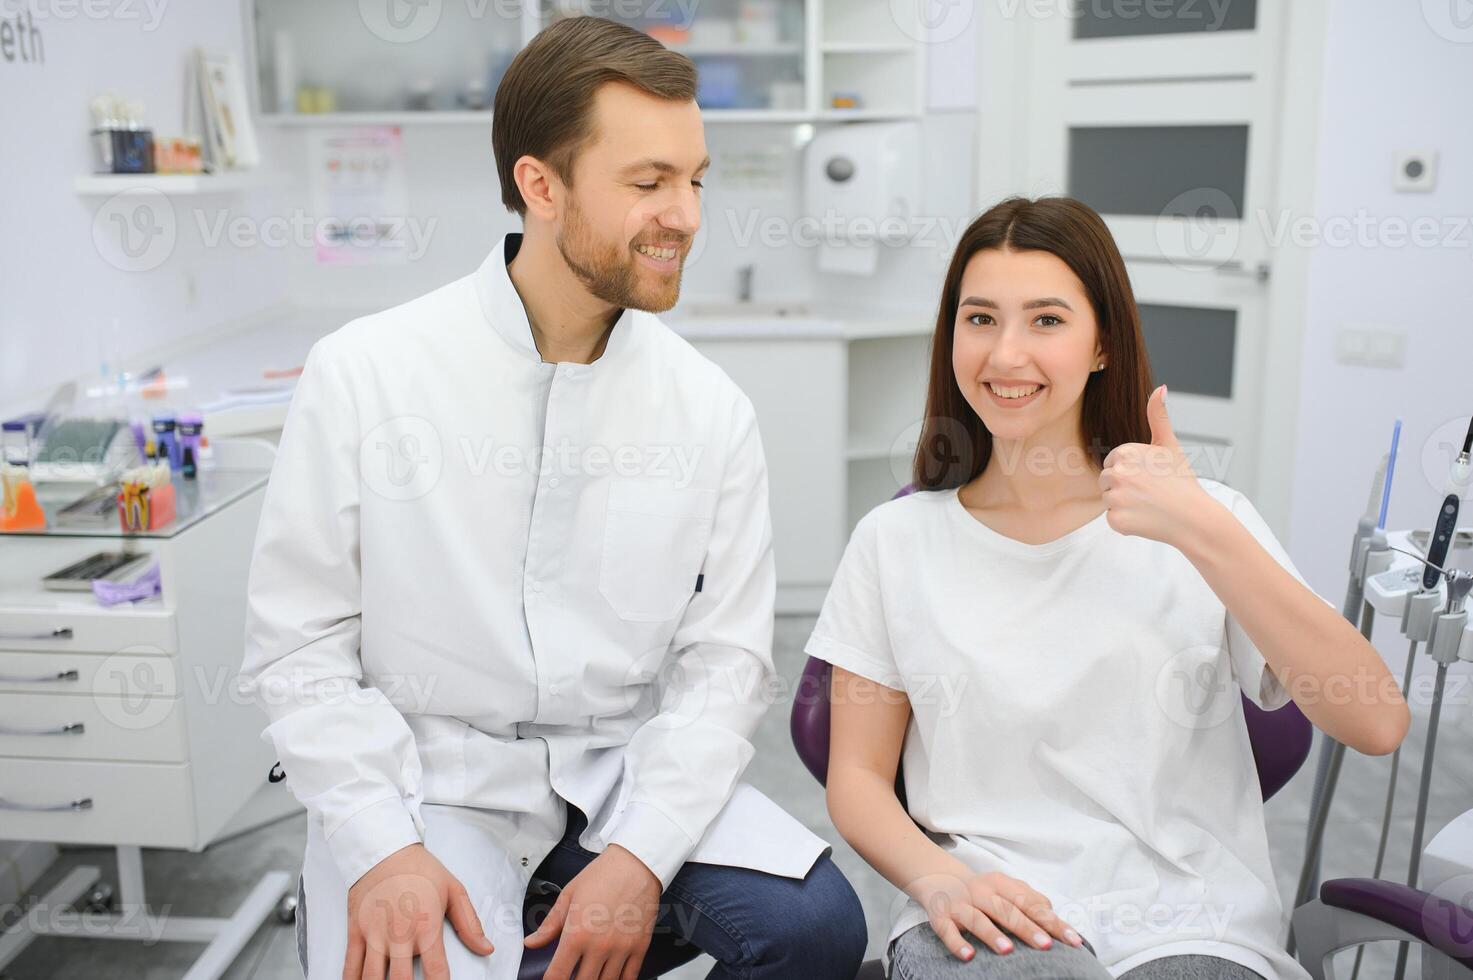 Young smiling woman with beautifiul teeth, having a dental inspection photo